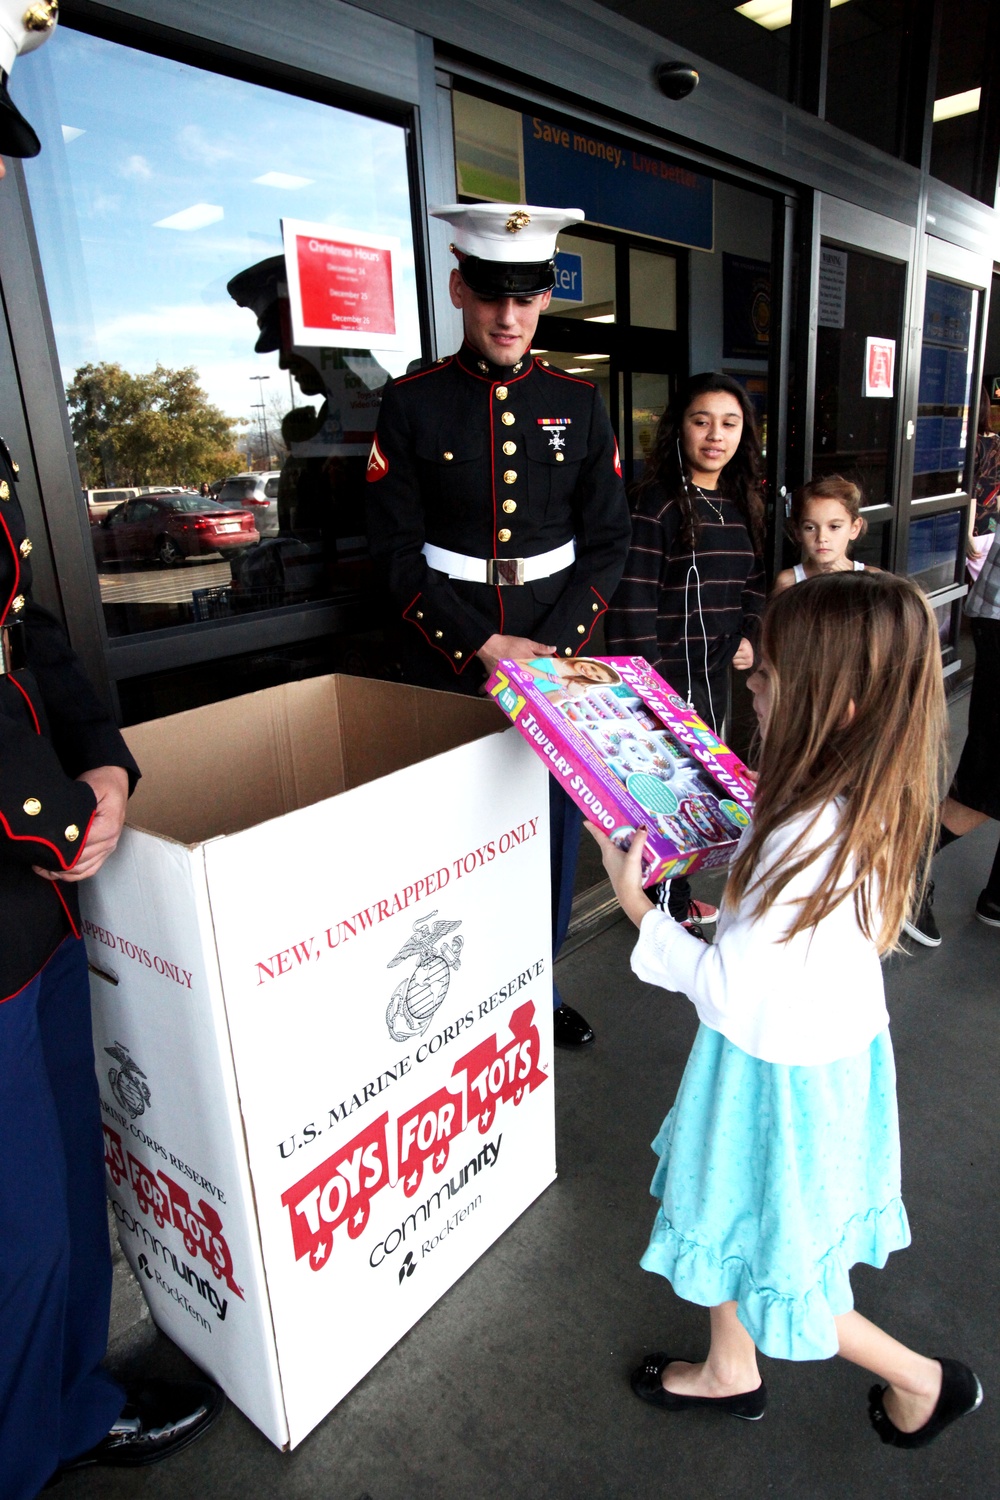 CLB-15 gives back to local community during Toys for Tots drive